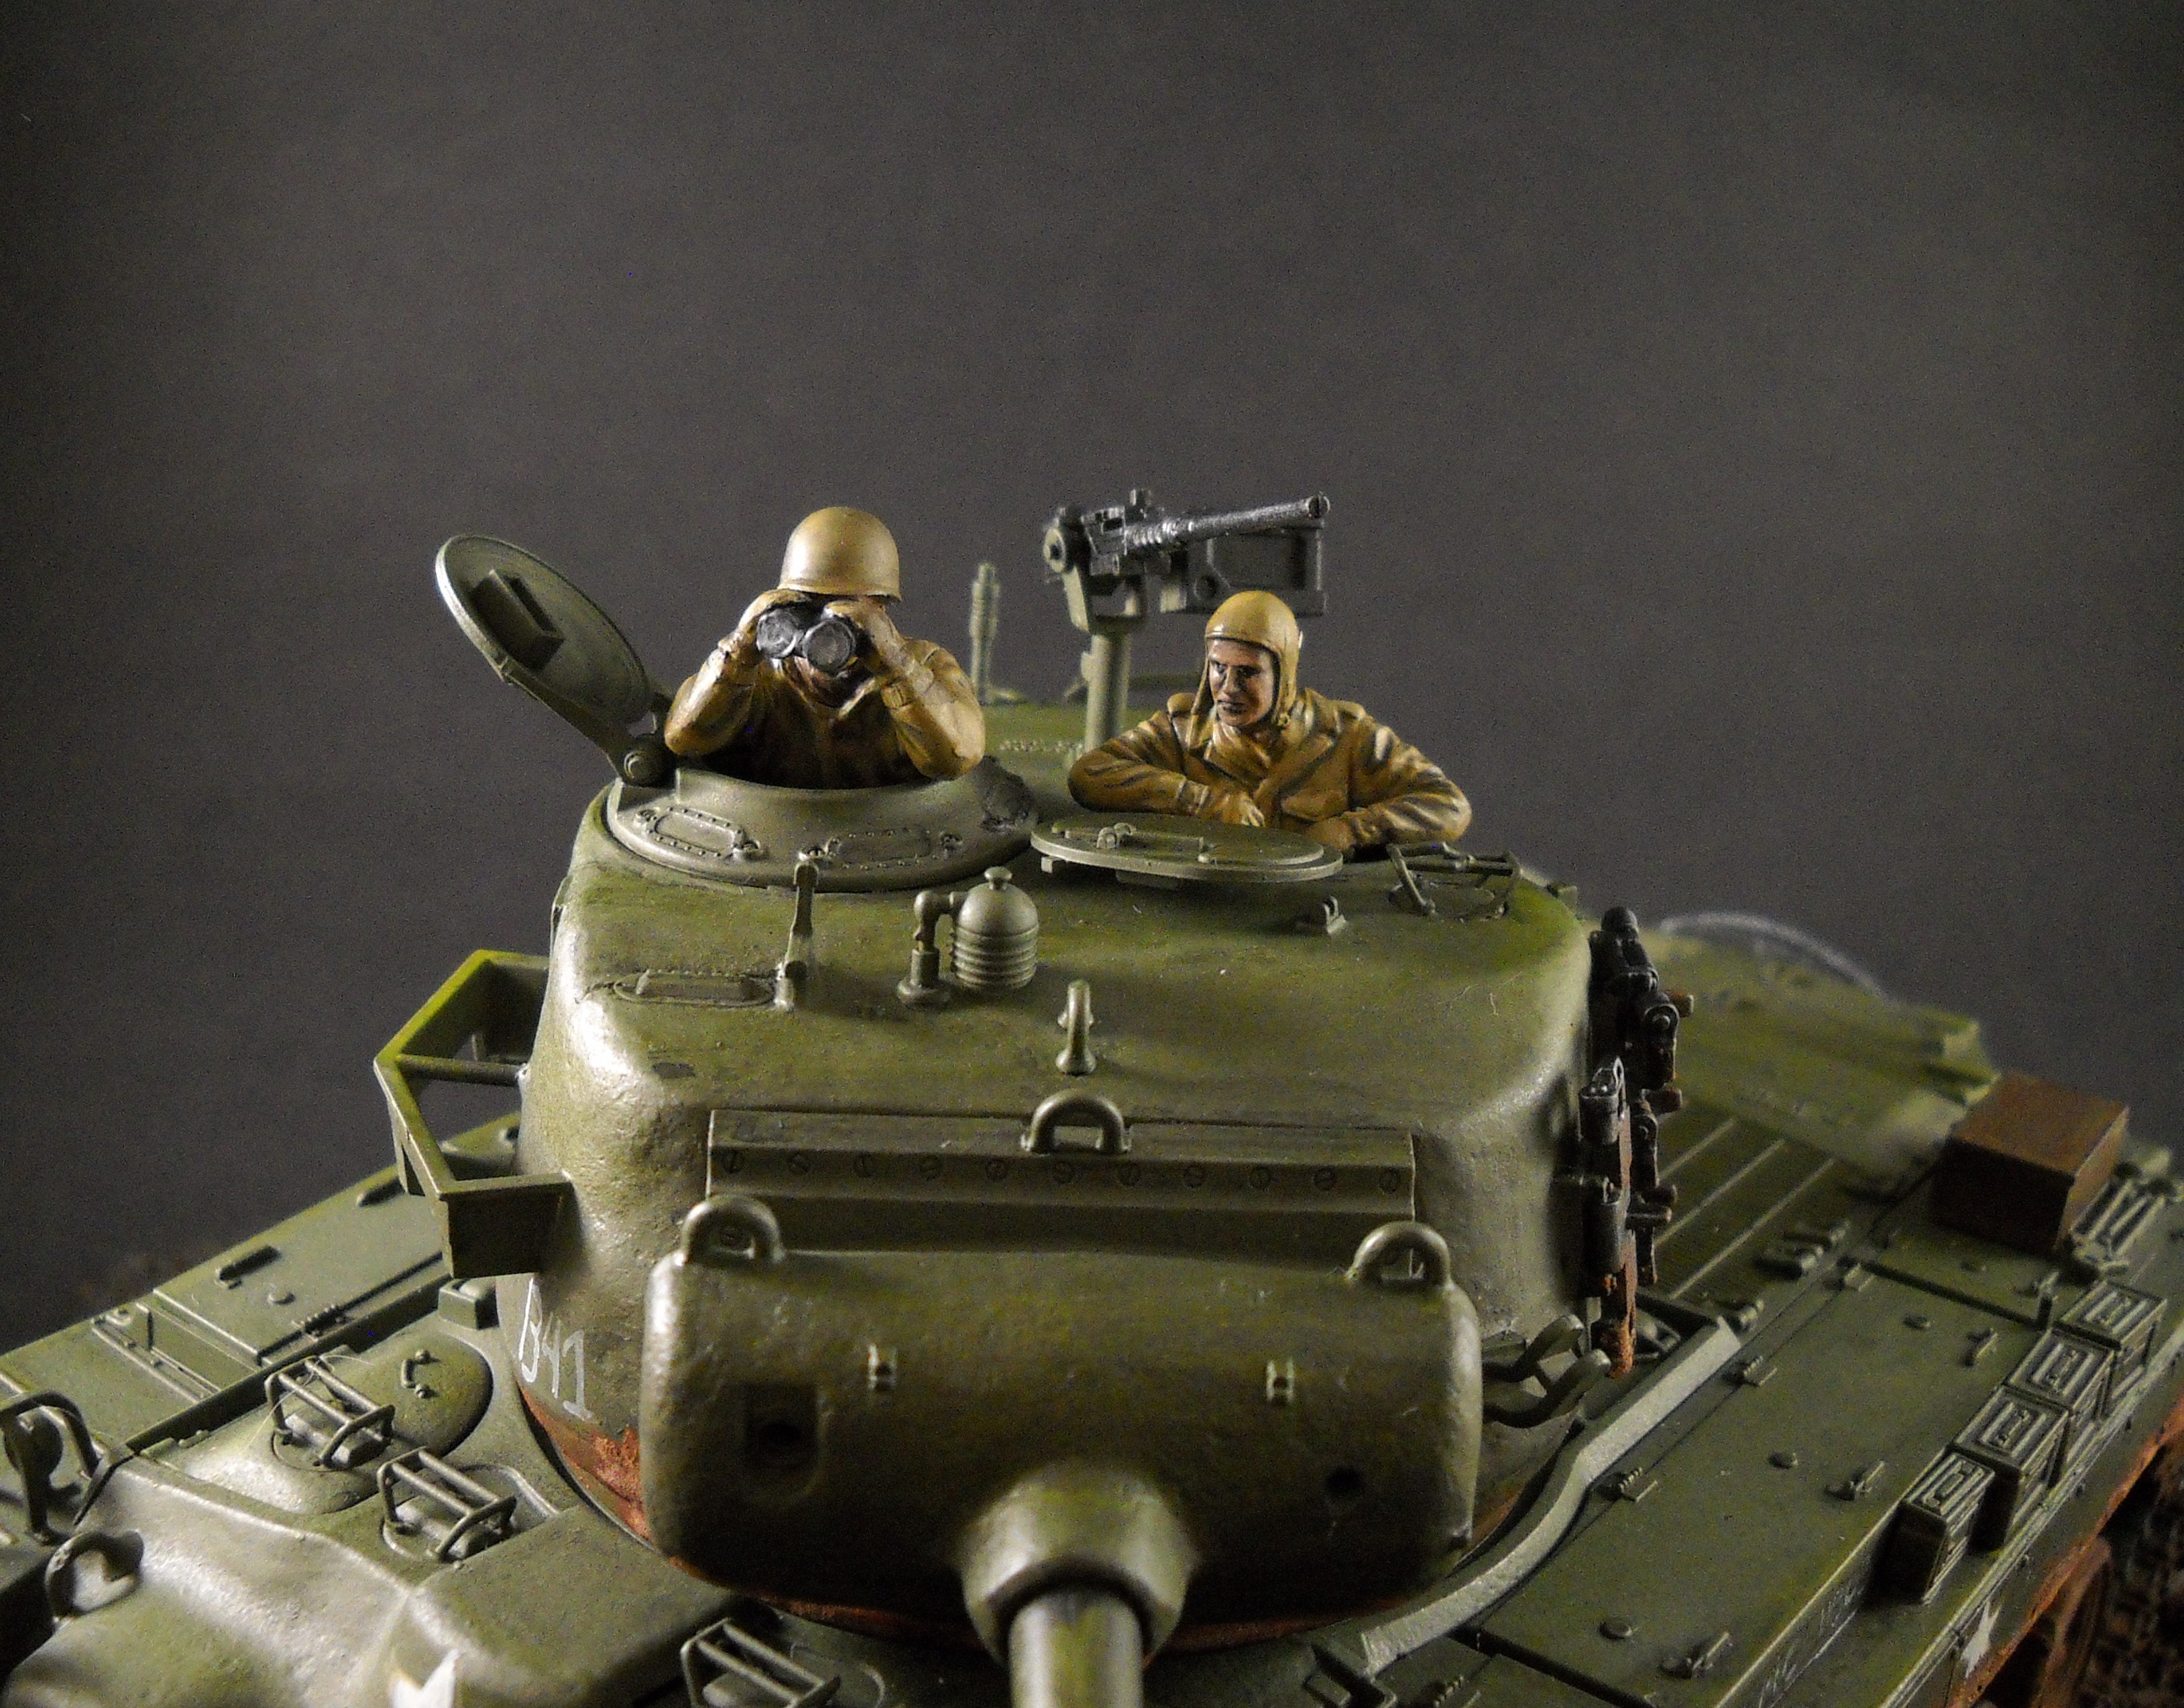 M26 Pershing, 1/35th scale from Tamiya